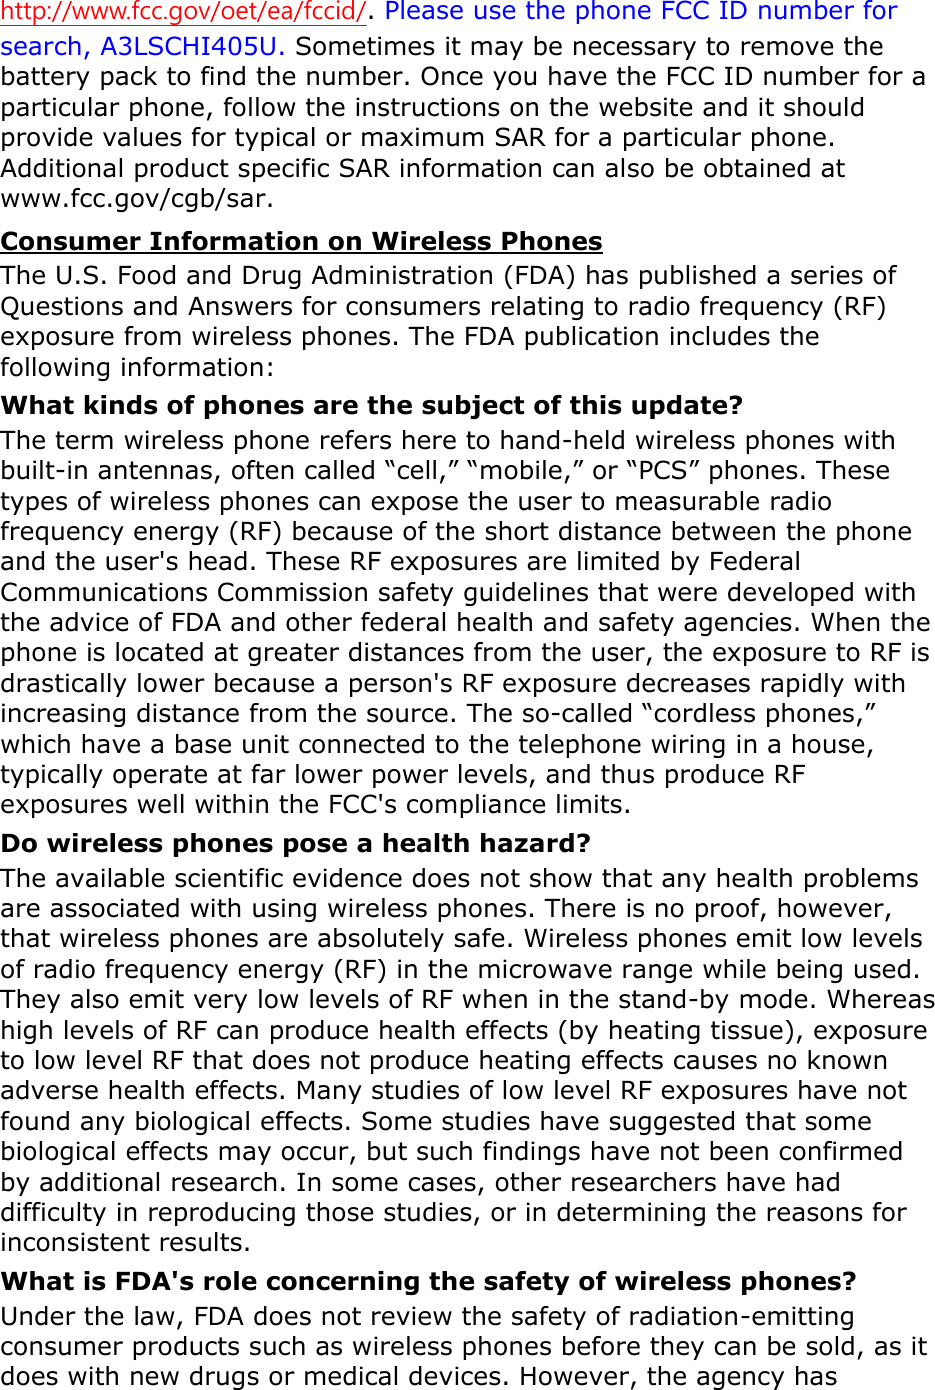 Page 8 of Samsung Electronics Co SCHI405U Portable Handset with Multi-band CDMA/LTE, WLAN and Bluetooth User Manual